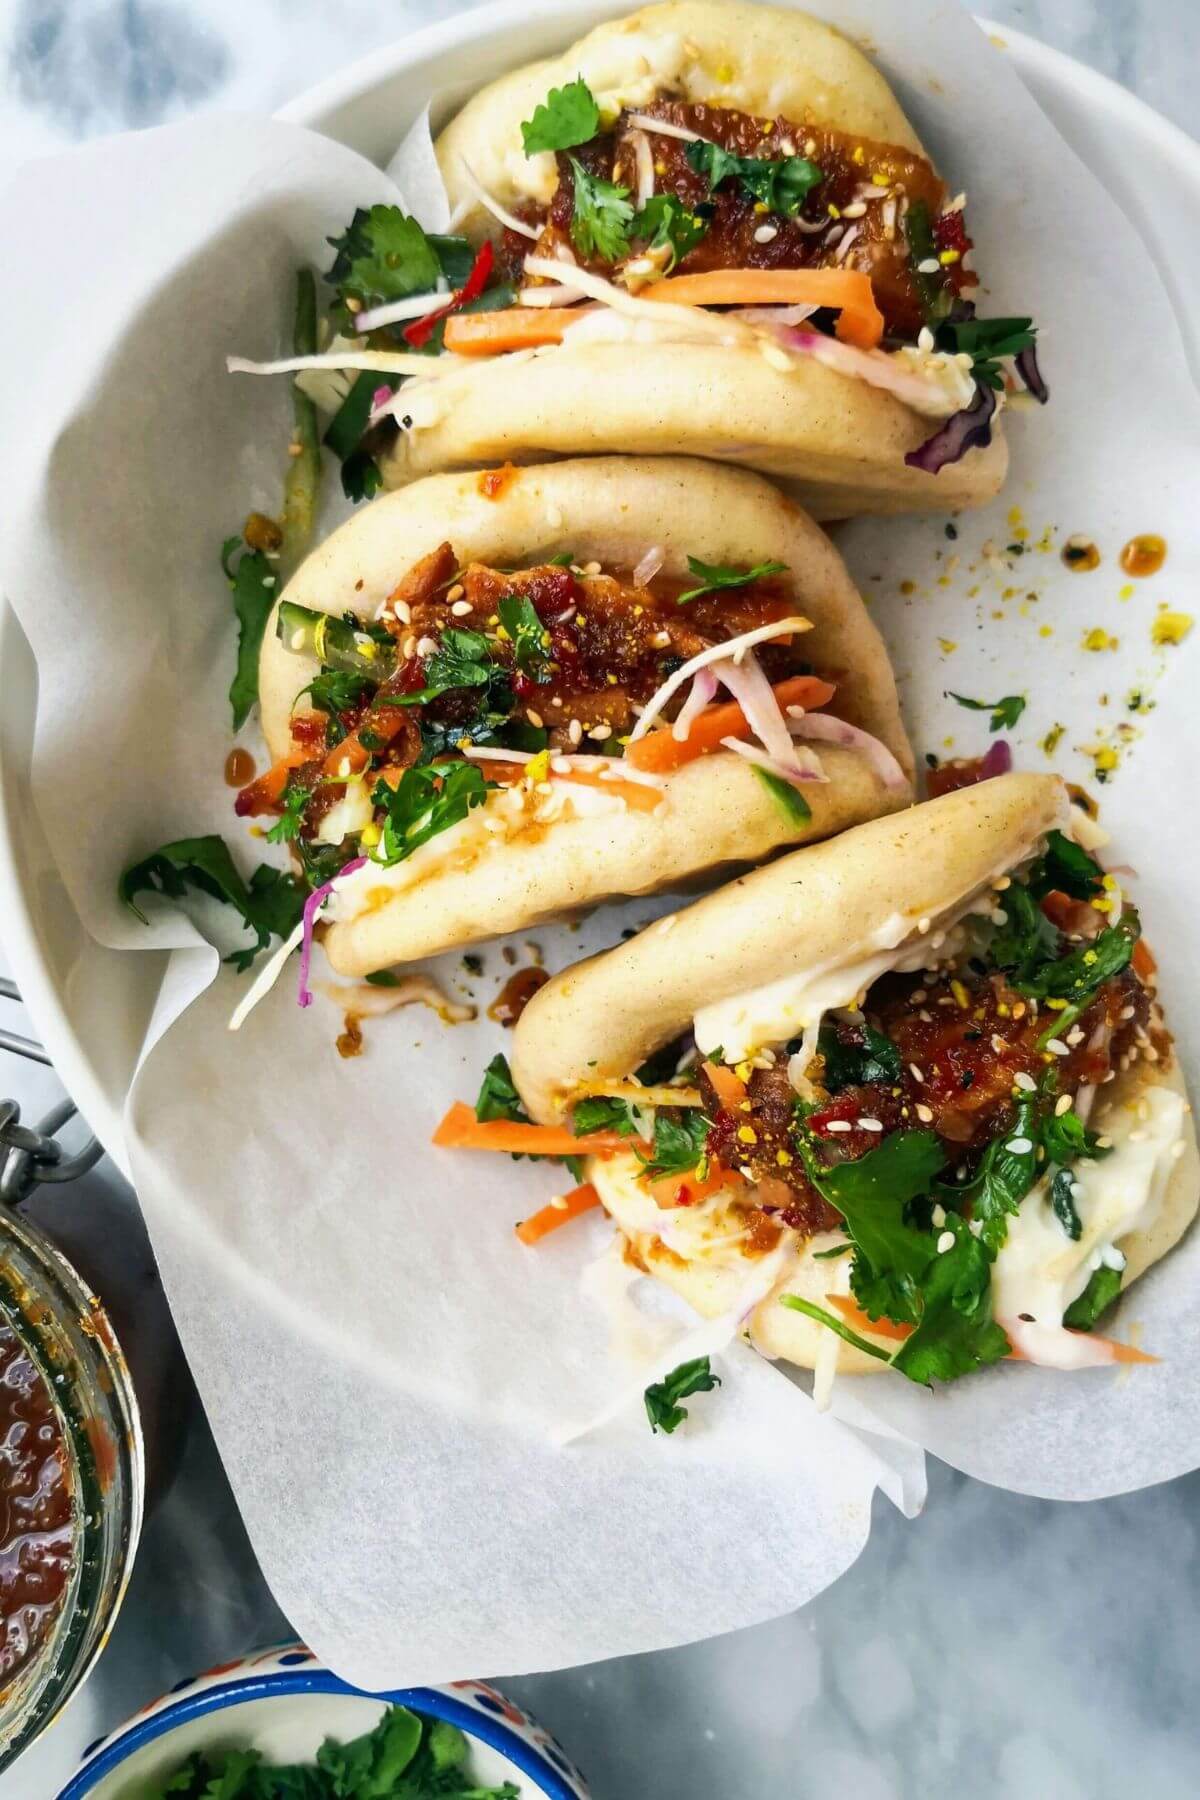 3 bao buns in a small white bowl with chilli jam on the side.